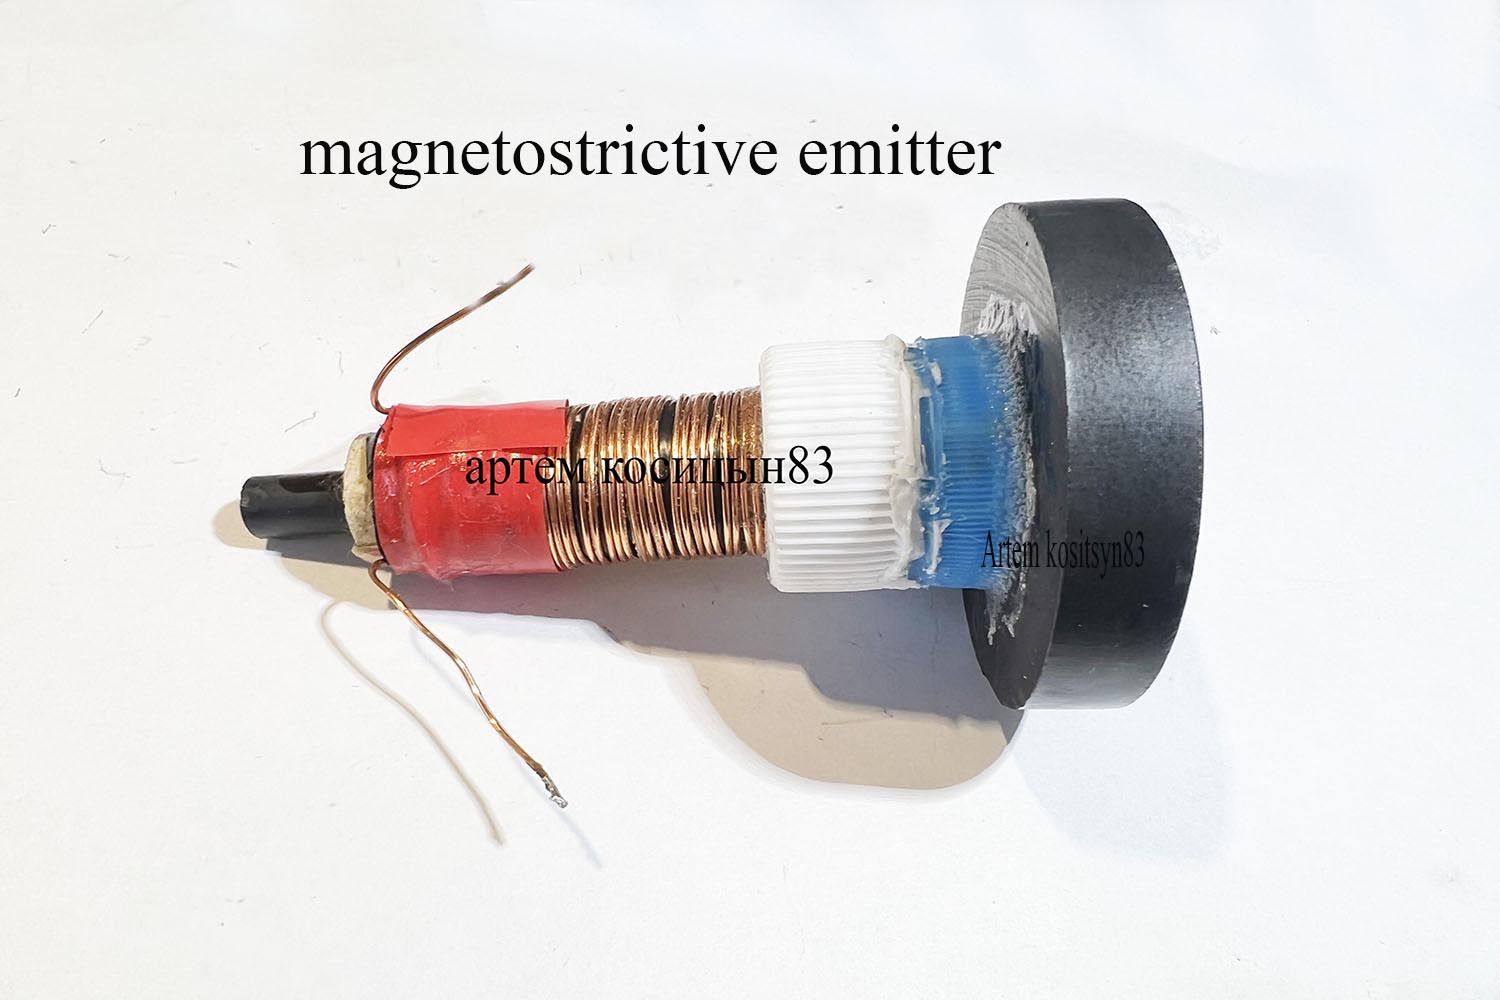 Подробнее о статье How to make a magnetostrictive emitter and conduct experiments with ultrasound